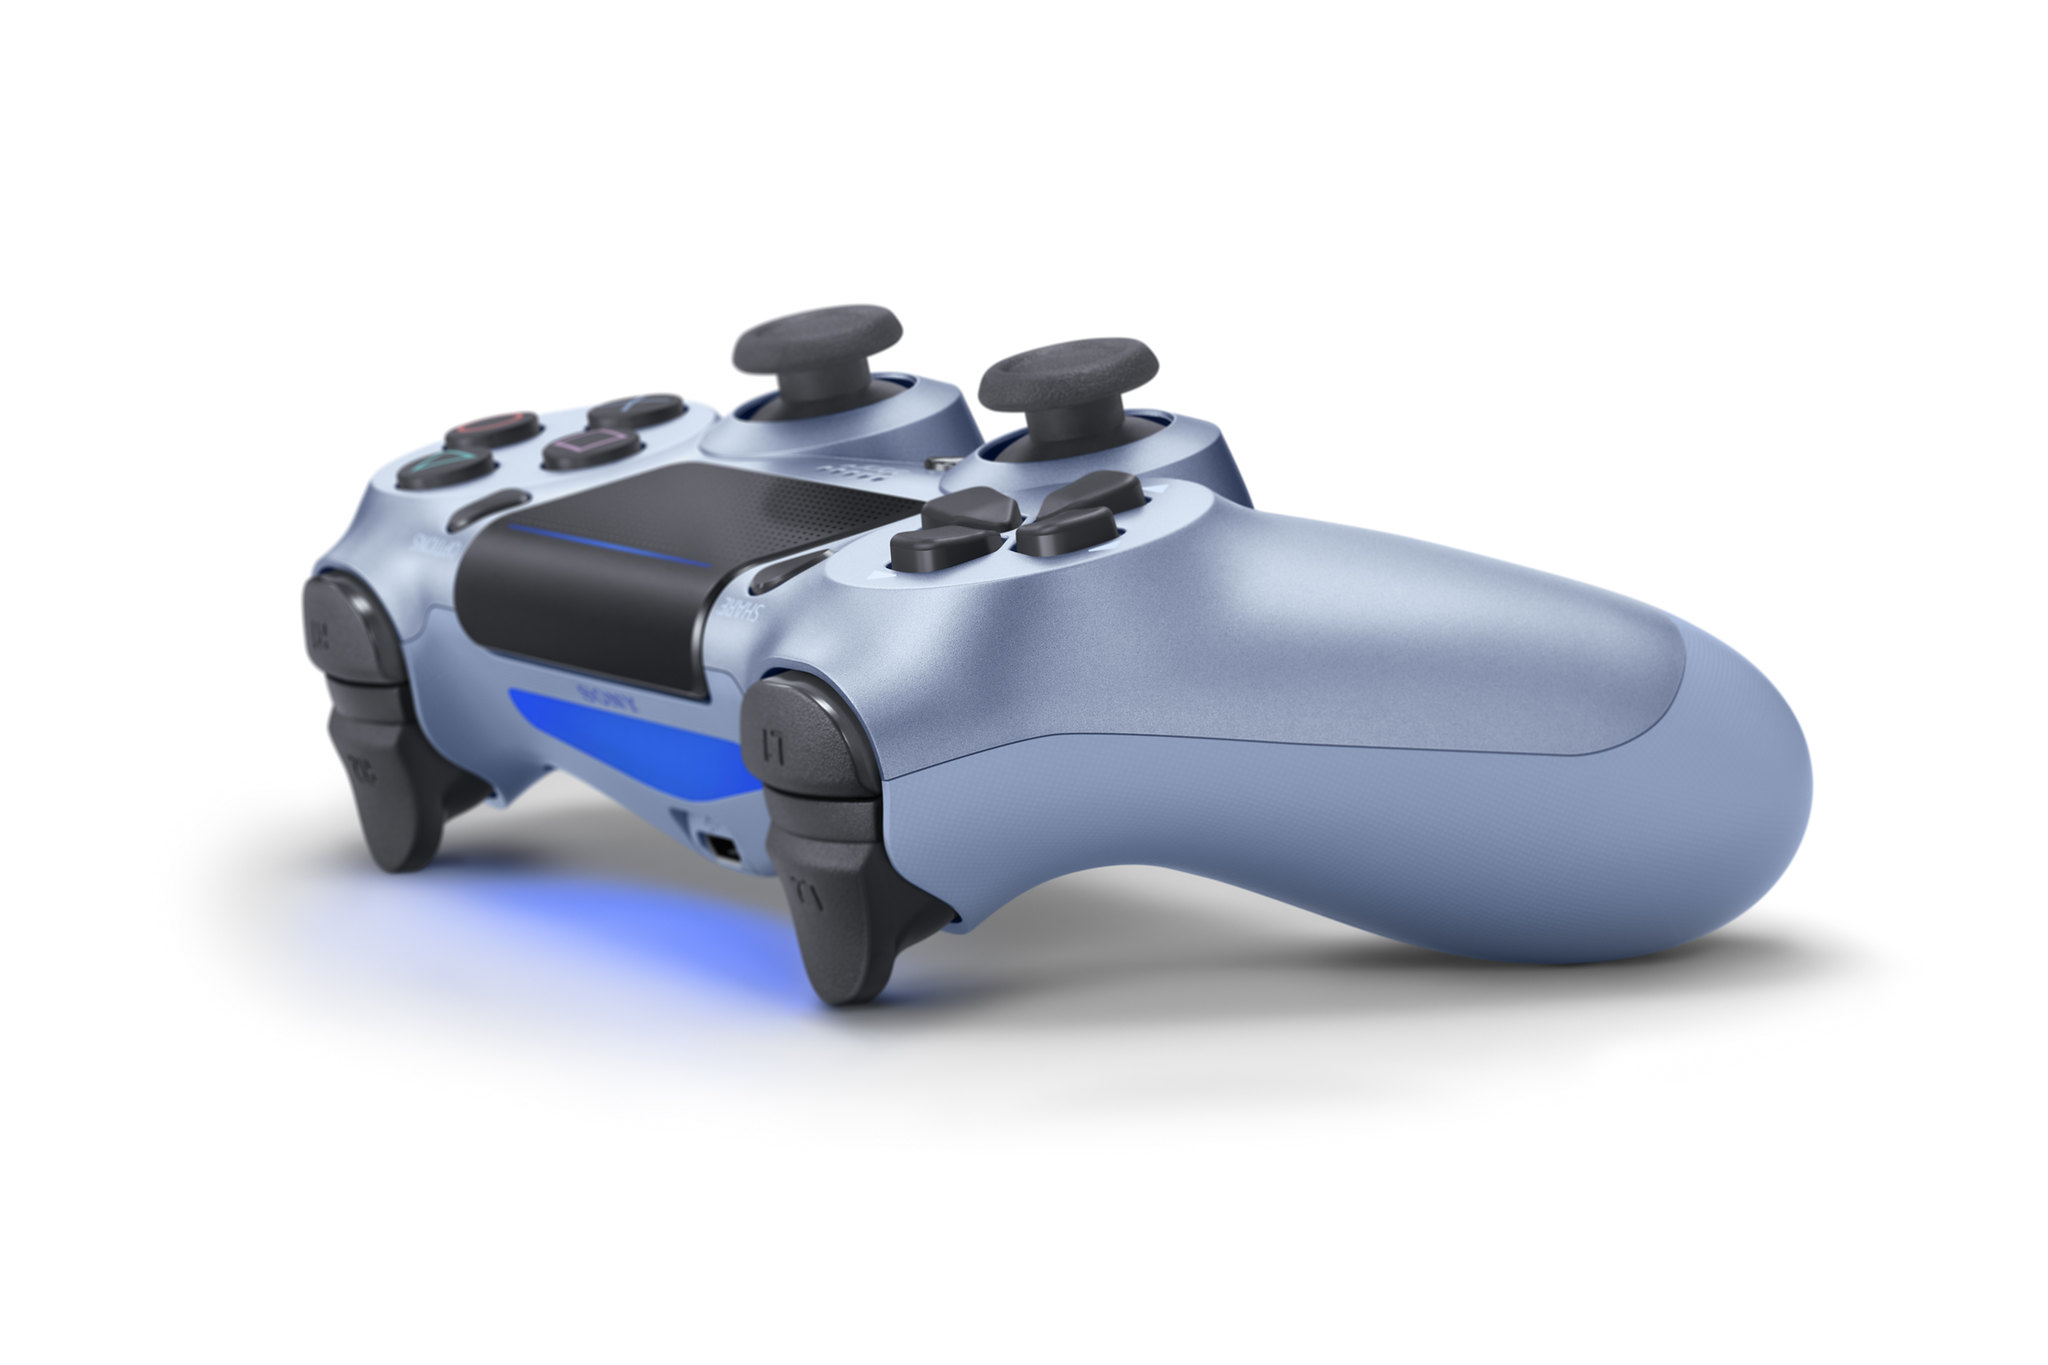 Four New Dualshock 4 Wireless Controller Colors New Gold Headset Design Coming This Fall Playstation Blog